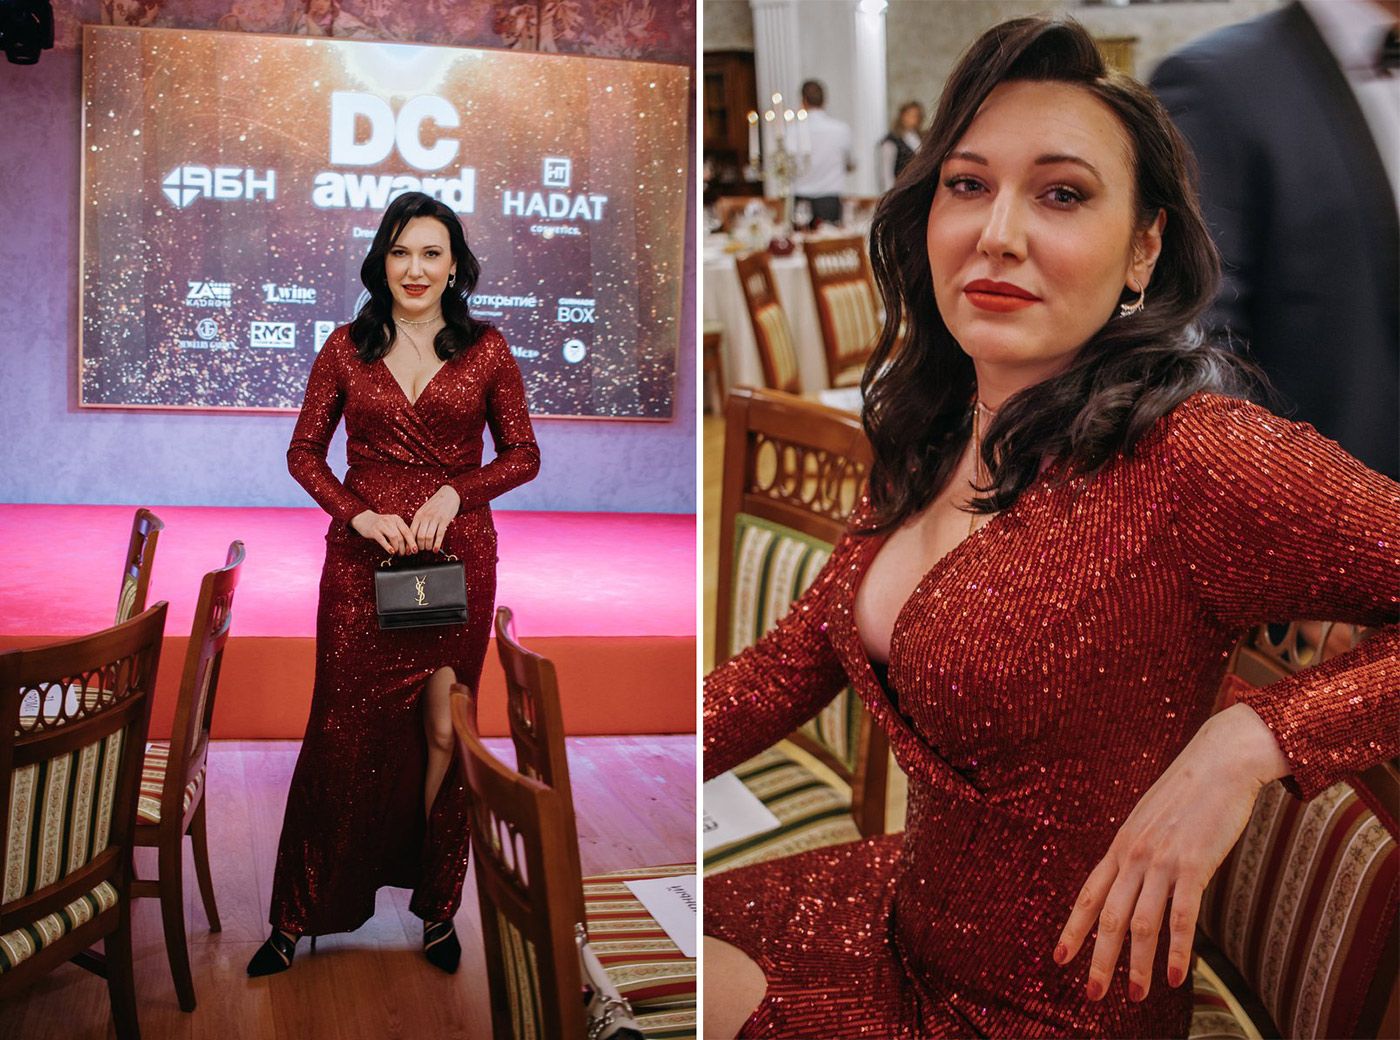 Katerina Perez at the DC Magazine Awards in St Petersburg, Russia, in December 2021